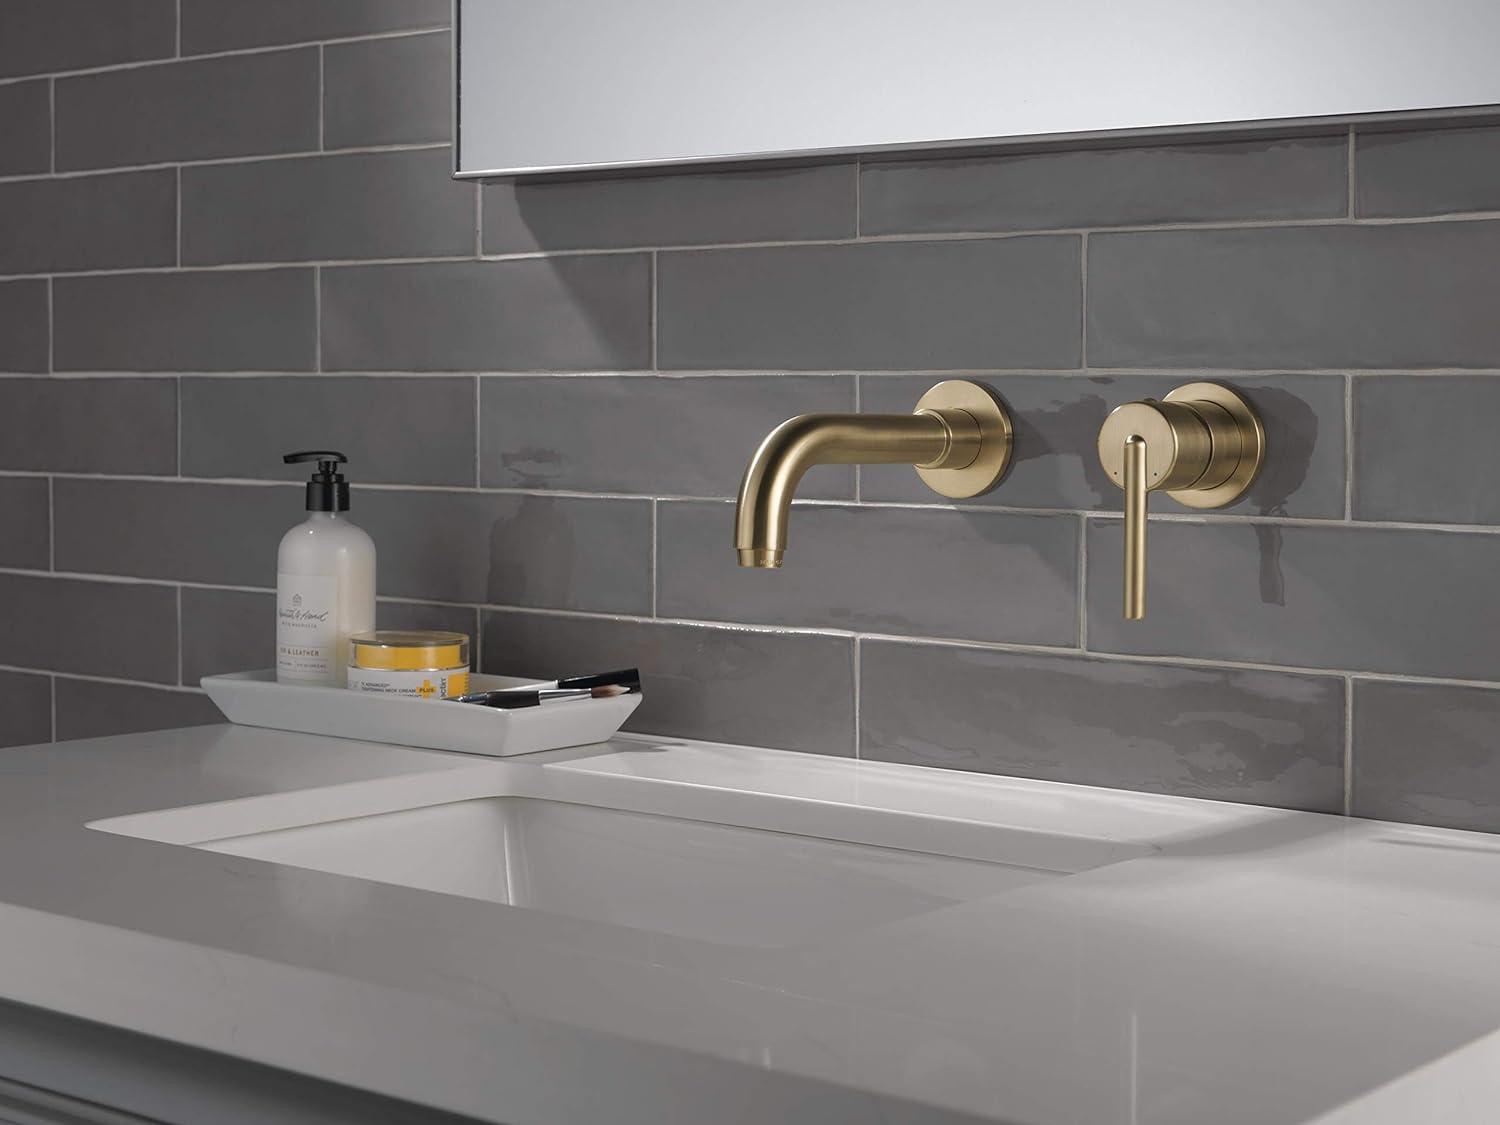 Trinsic Contemporary Bronze Wall-Mounted Bathroom Faucet